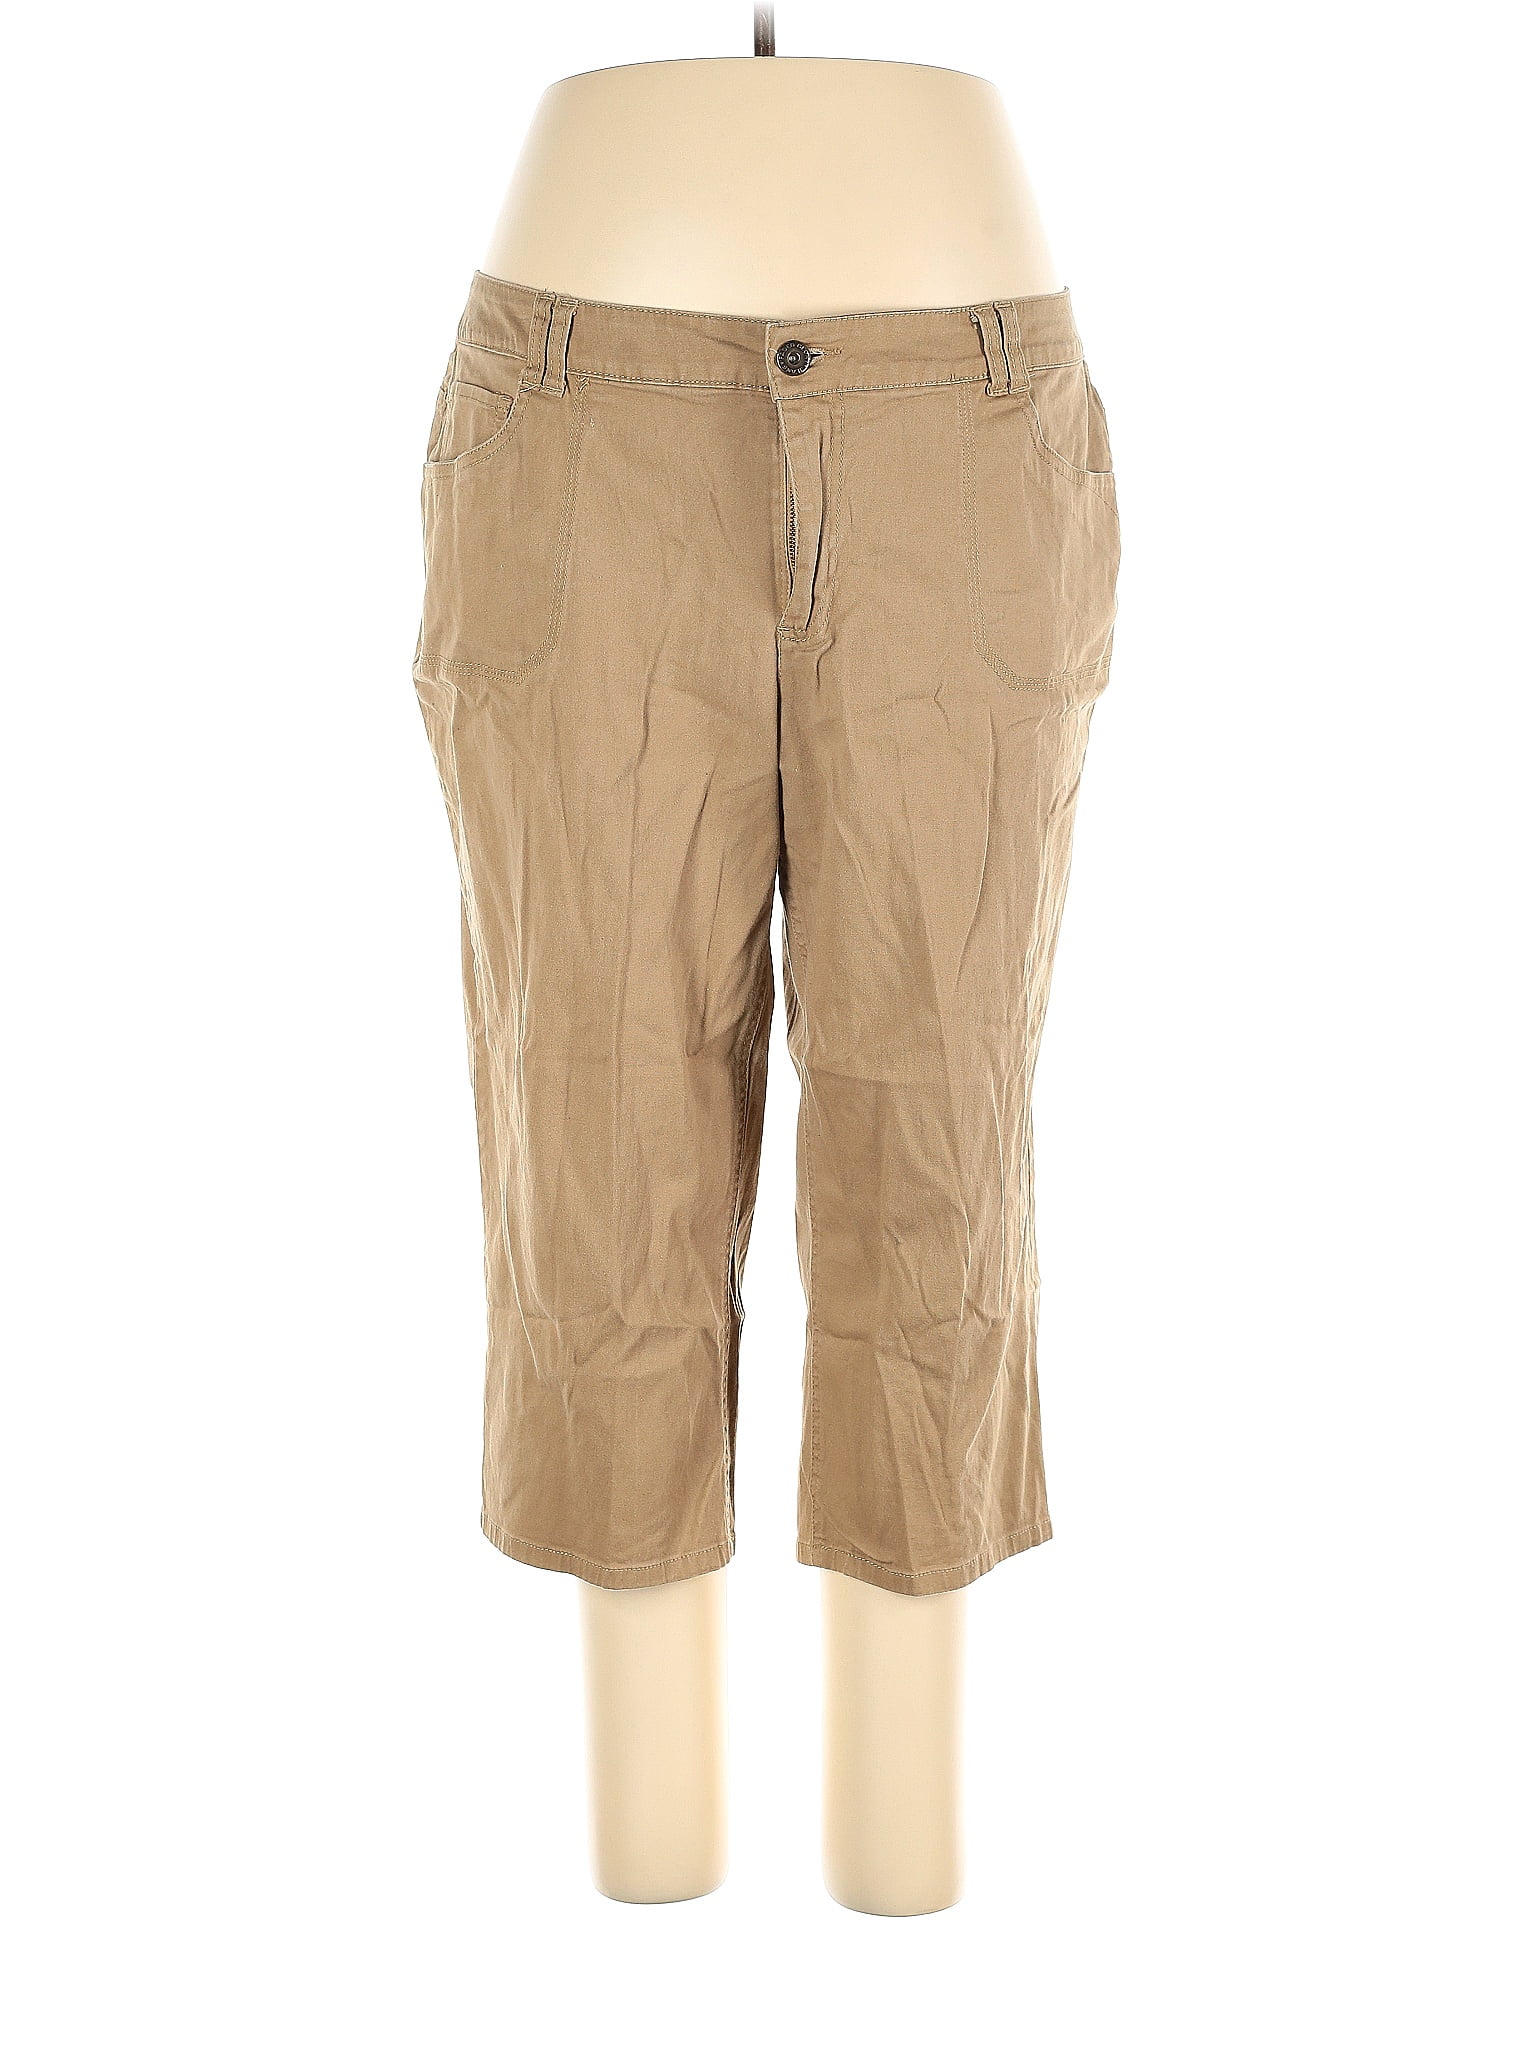 Faded Glory Solid Brown Tan Khakis Size 18 (Plus) - 56% off | thredUP